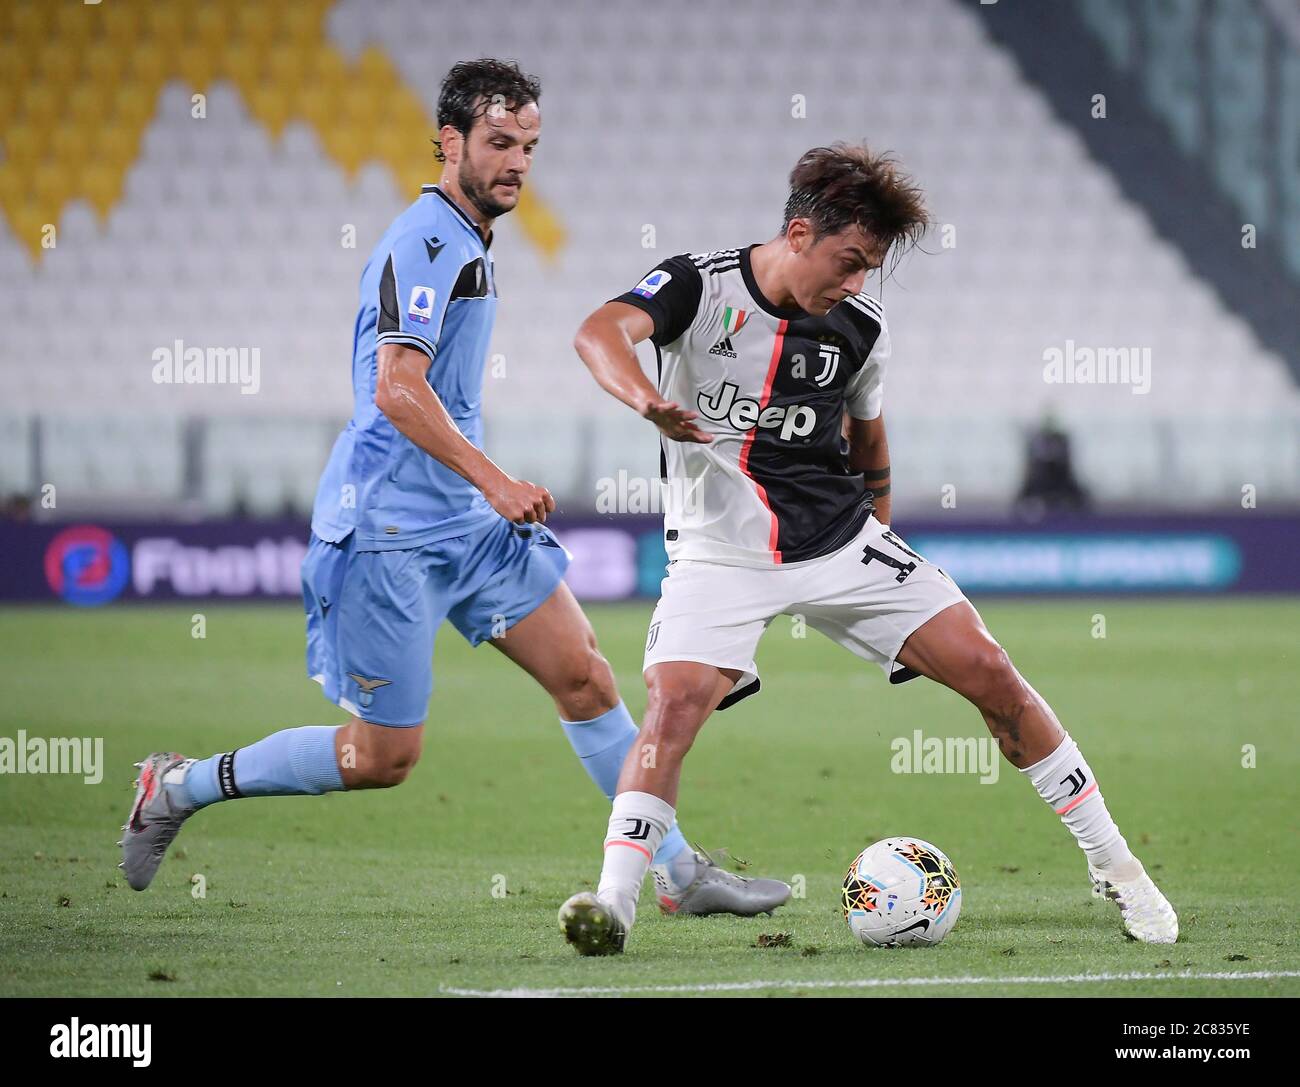 Turin, Italy. 20th July, 2020. FC Juventus' Paulo Dybala (R) vies with Lazio's Marco Parolo during the Serie A football match in Turin, Italy, July 20, 2020. Credit: Federico Tardito/Xinhua/Alamy Live News Stock Photo